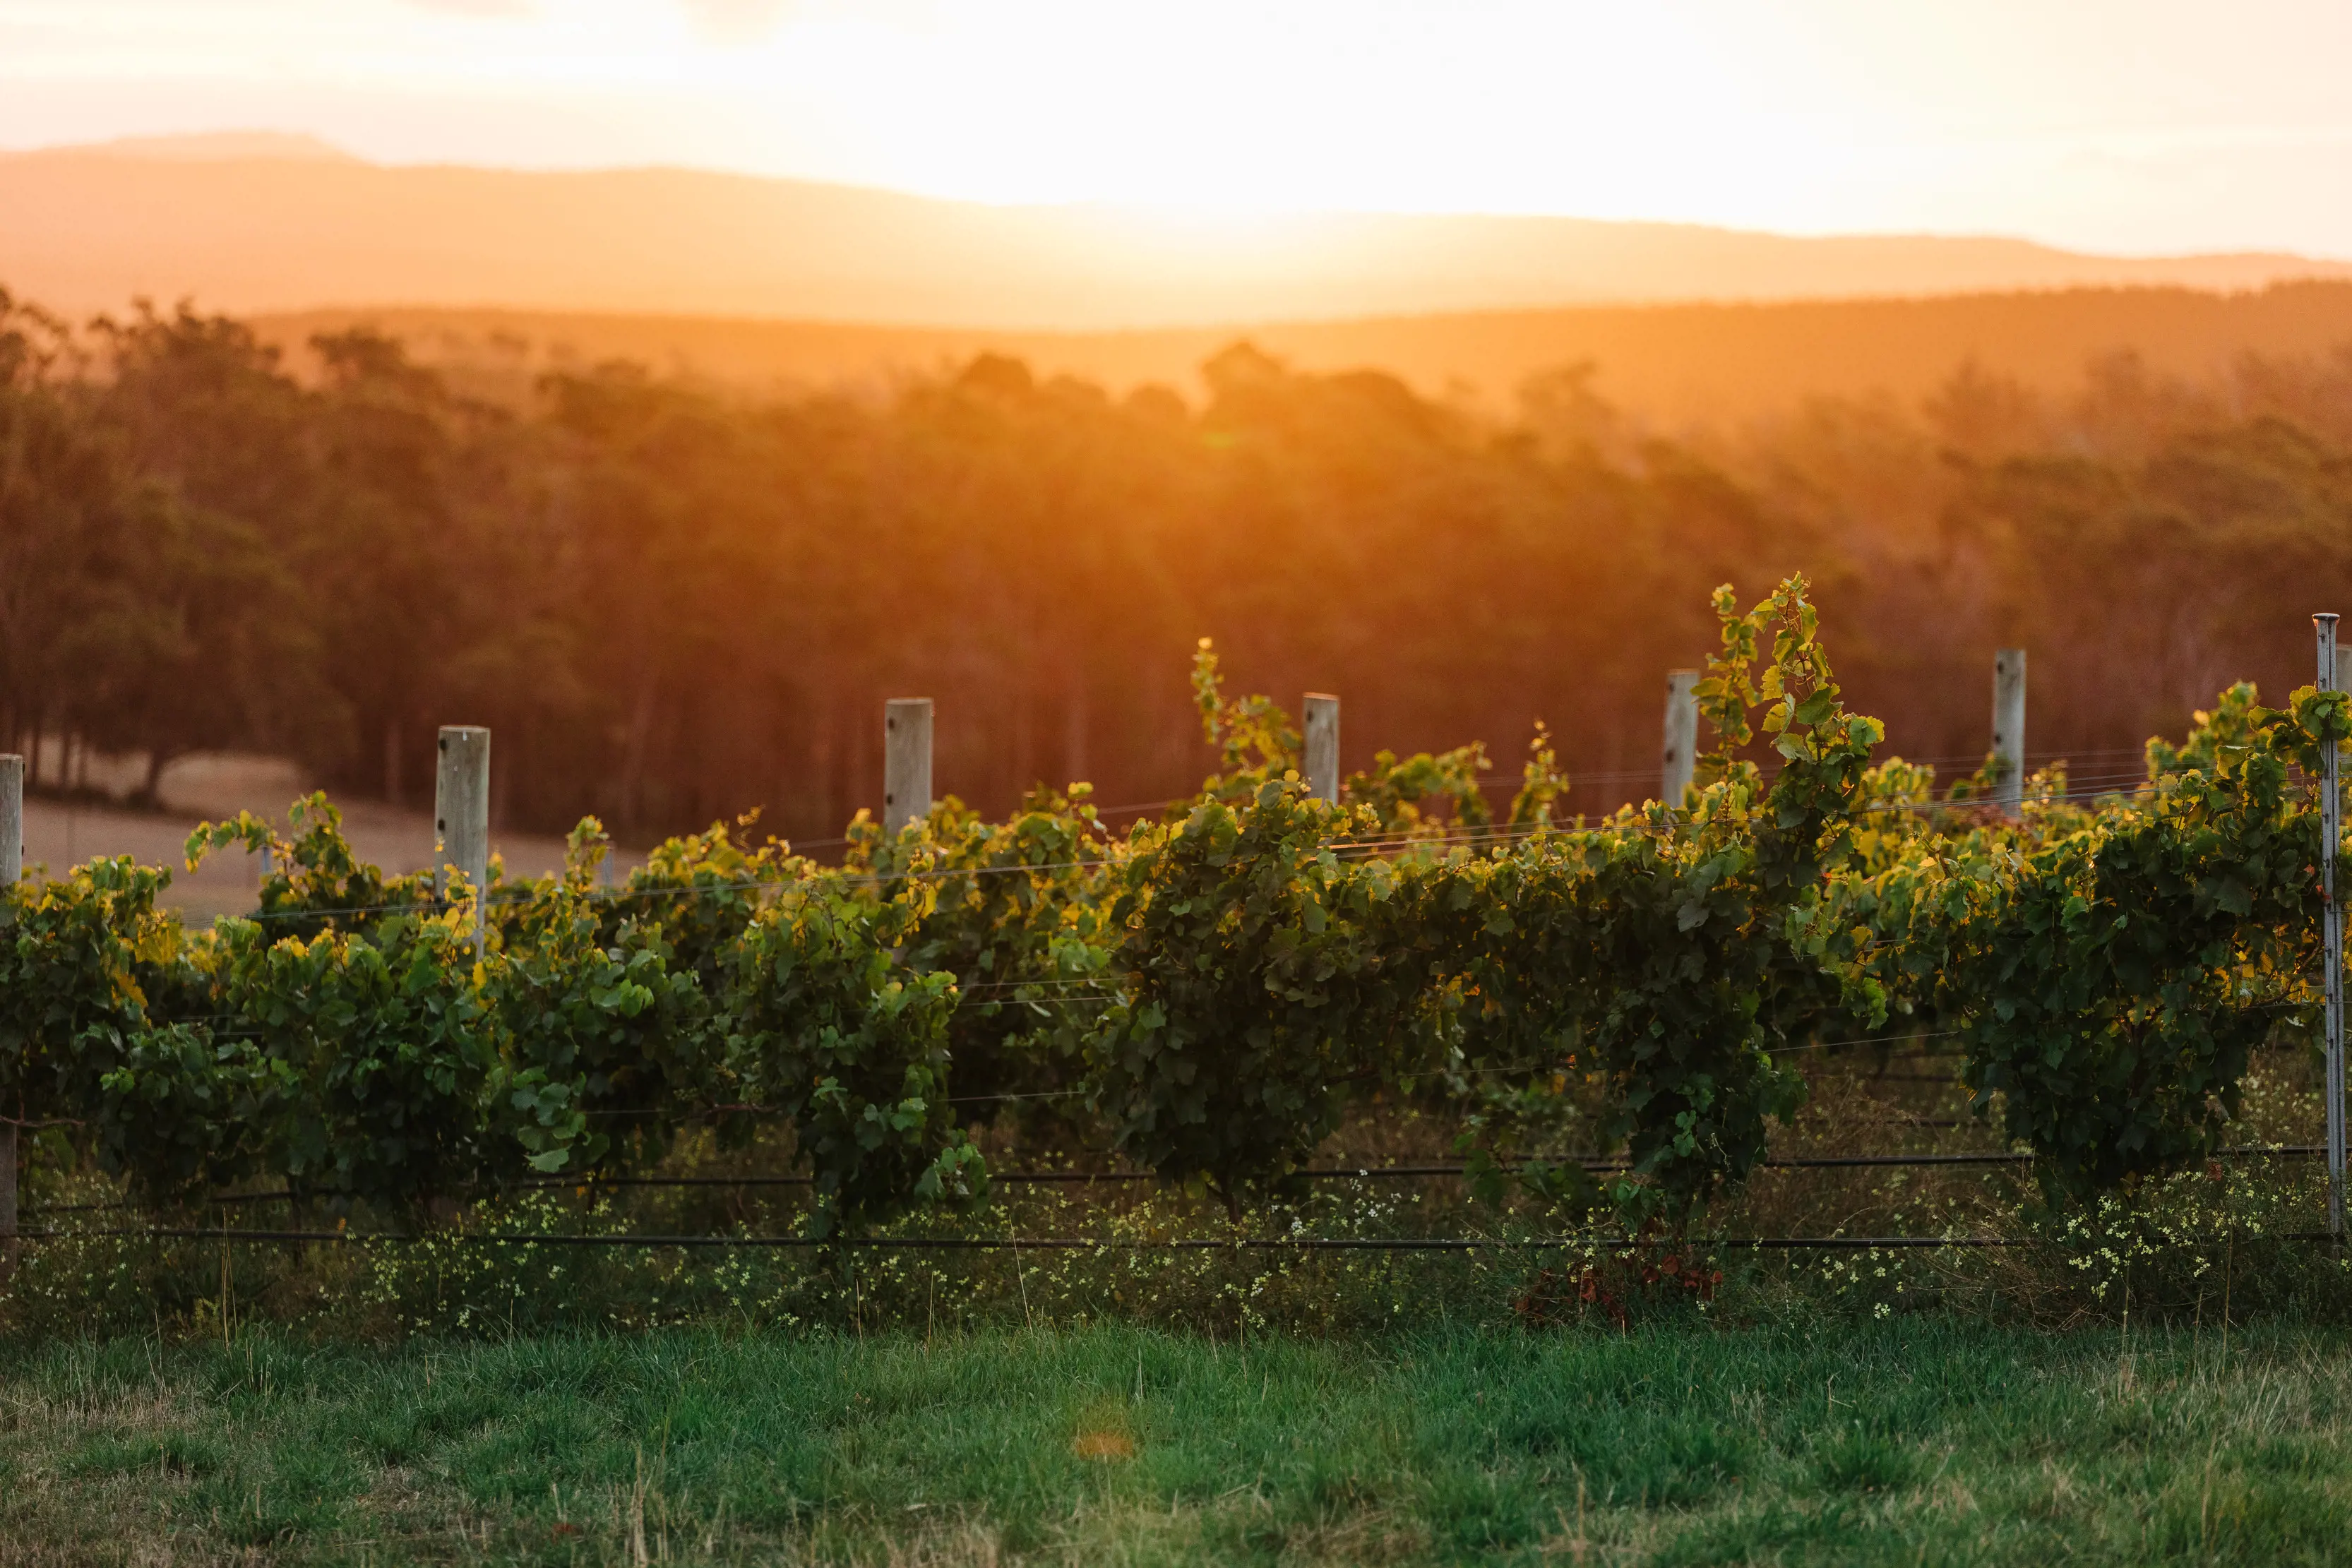 The sun shines brightly over Delamere Vineyards.